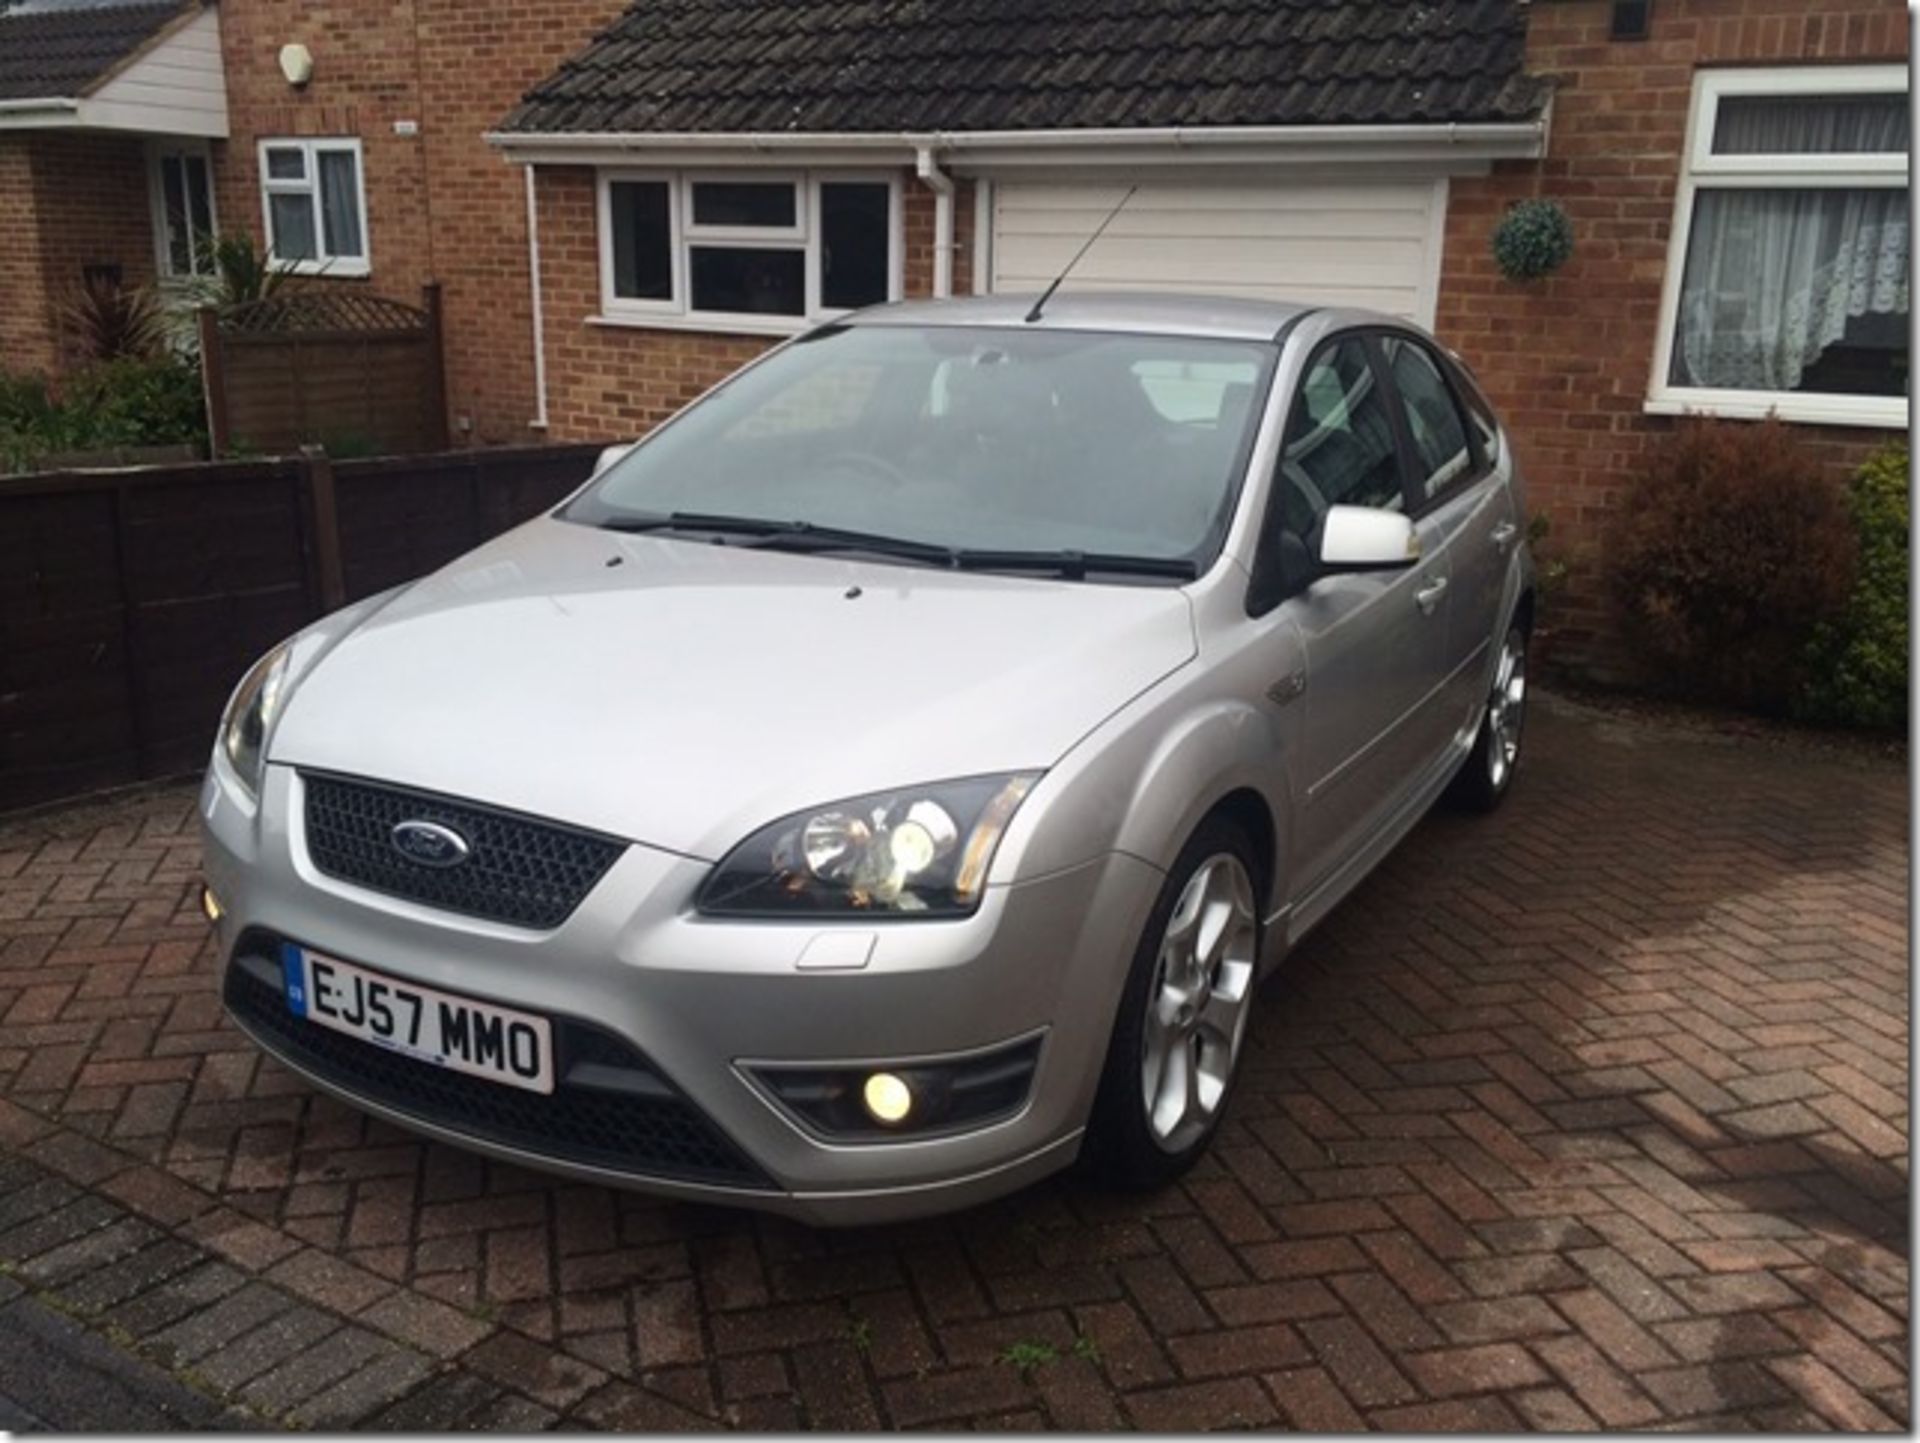 2007 57-reg Ford Focus ST 2 2500cc Turbo Charged 225bhp Engine 5dr Manual - Image 2 of 2